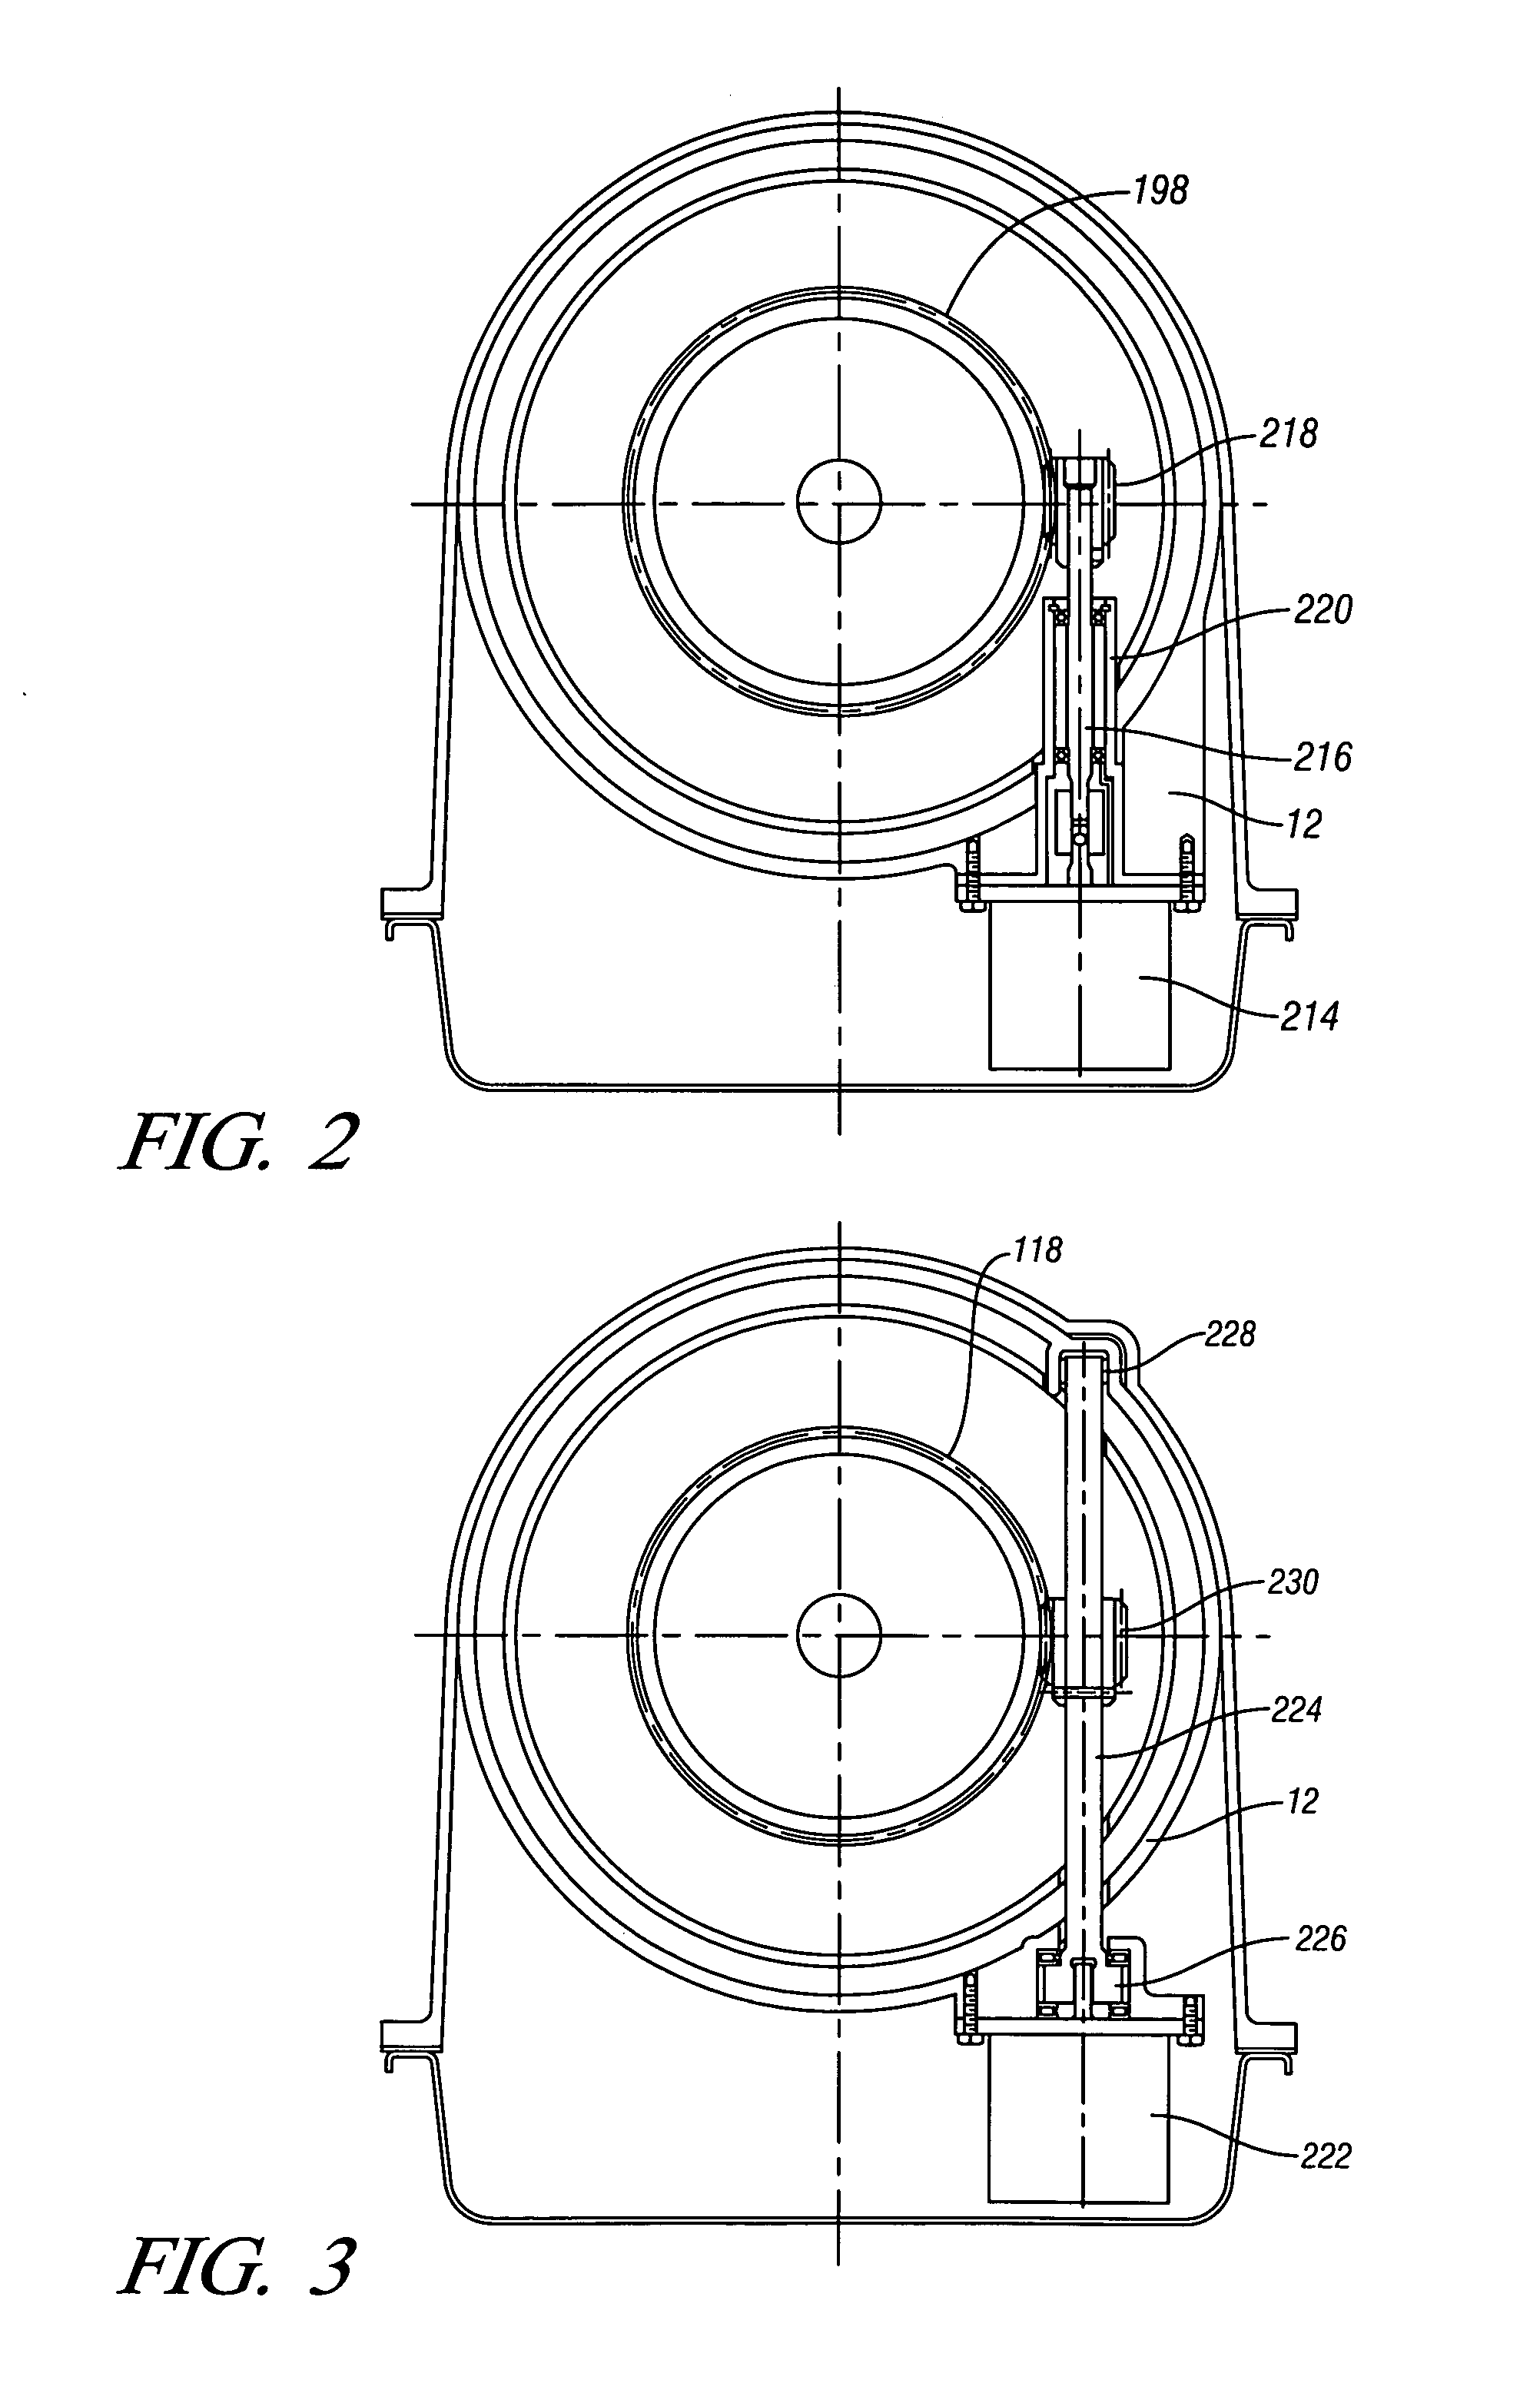 Torque-transmitting mechanisms for a planetary transmission